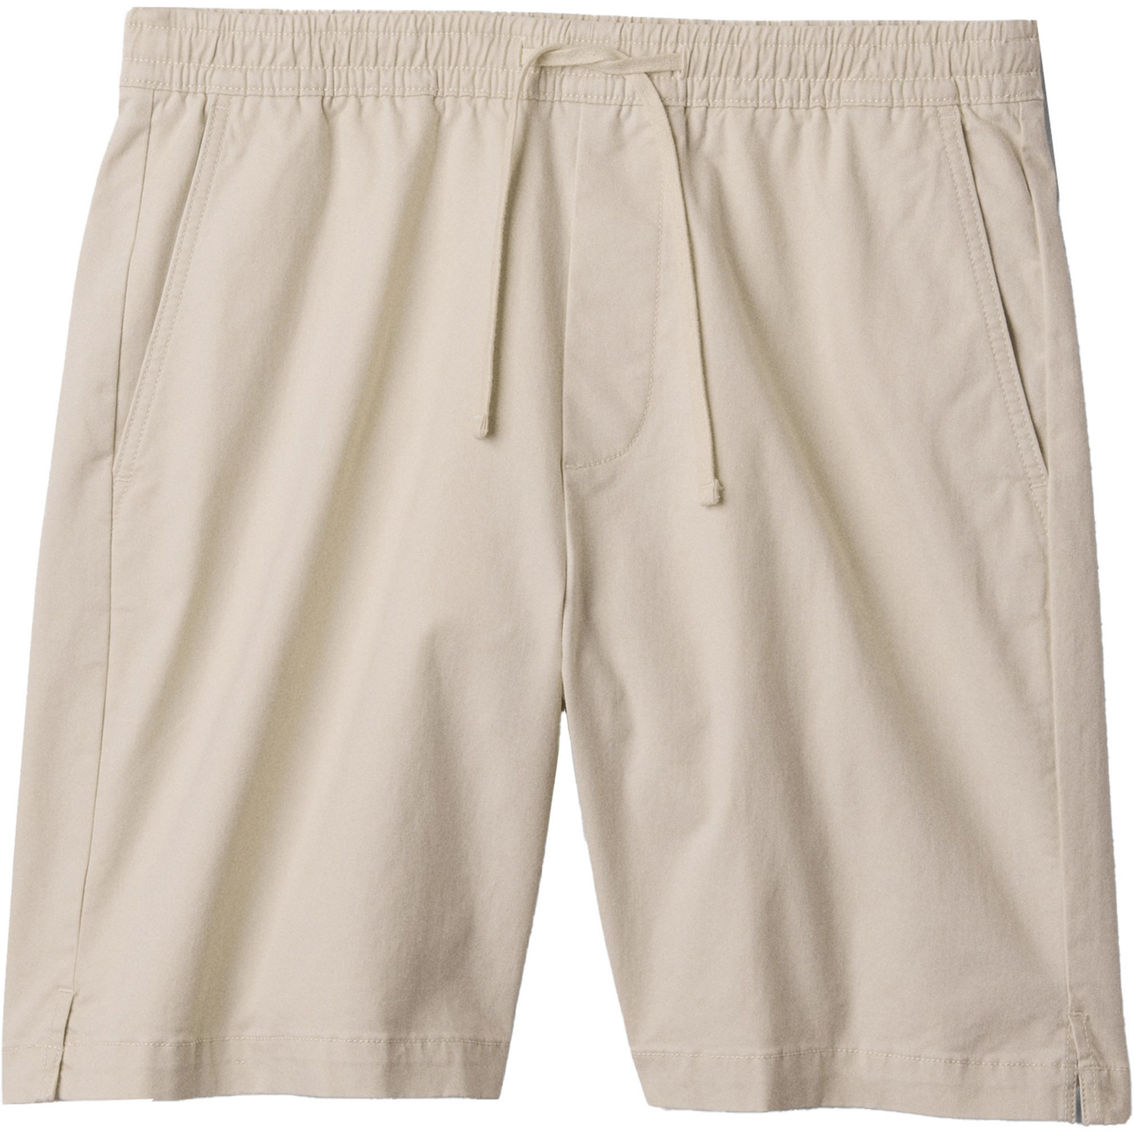 Gap 8 in. Essential Easy Shorts - Image 4 of 4